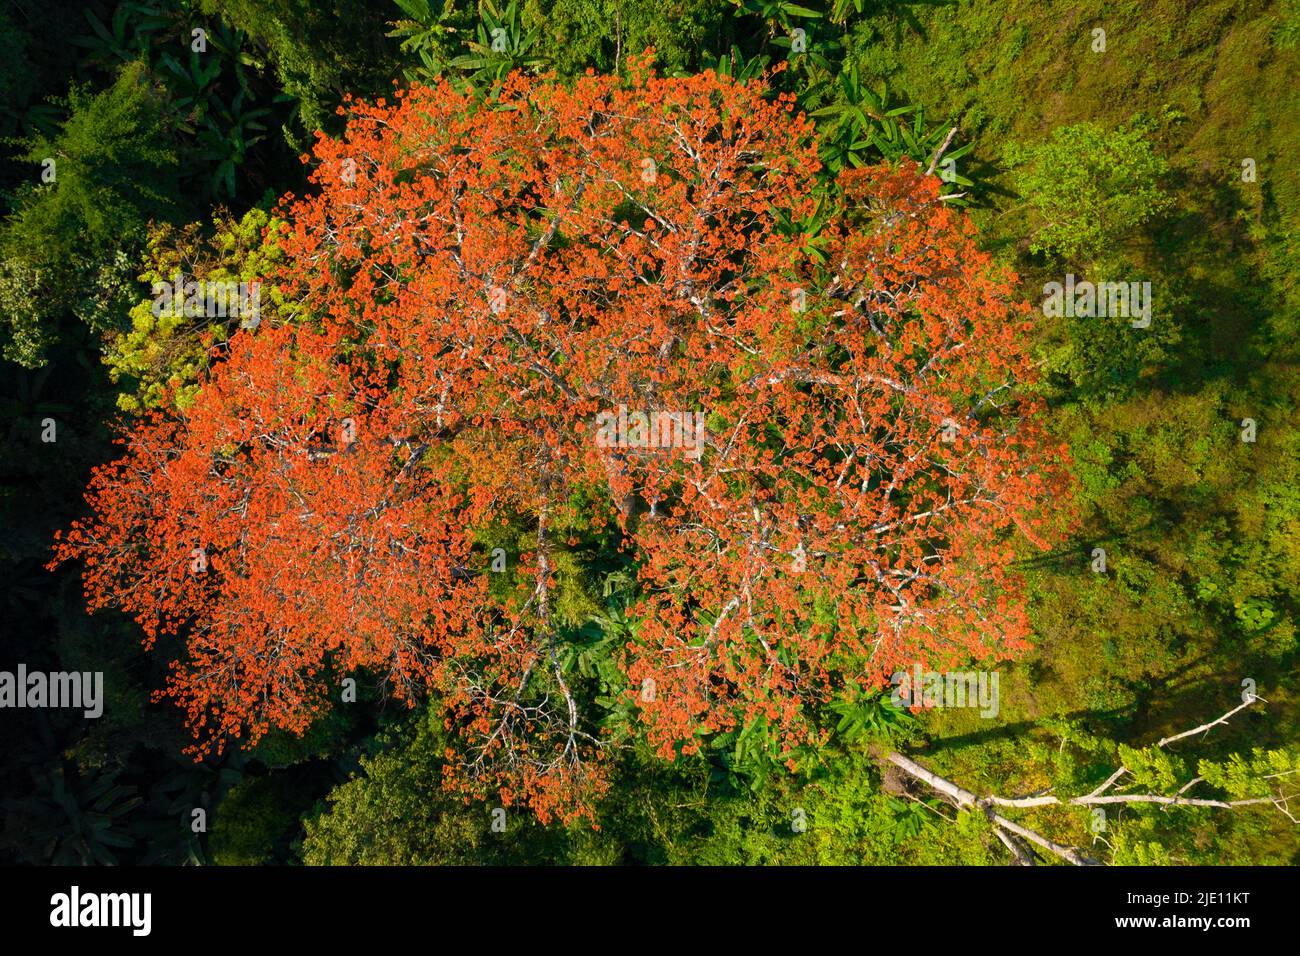 Aerial top view of a Pterocymbium macranthum  tree in full blossom, Chiang dao rainforest, Thailand Stock Photo